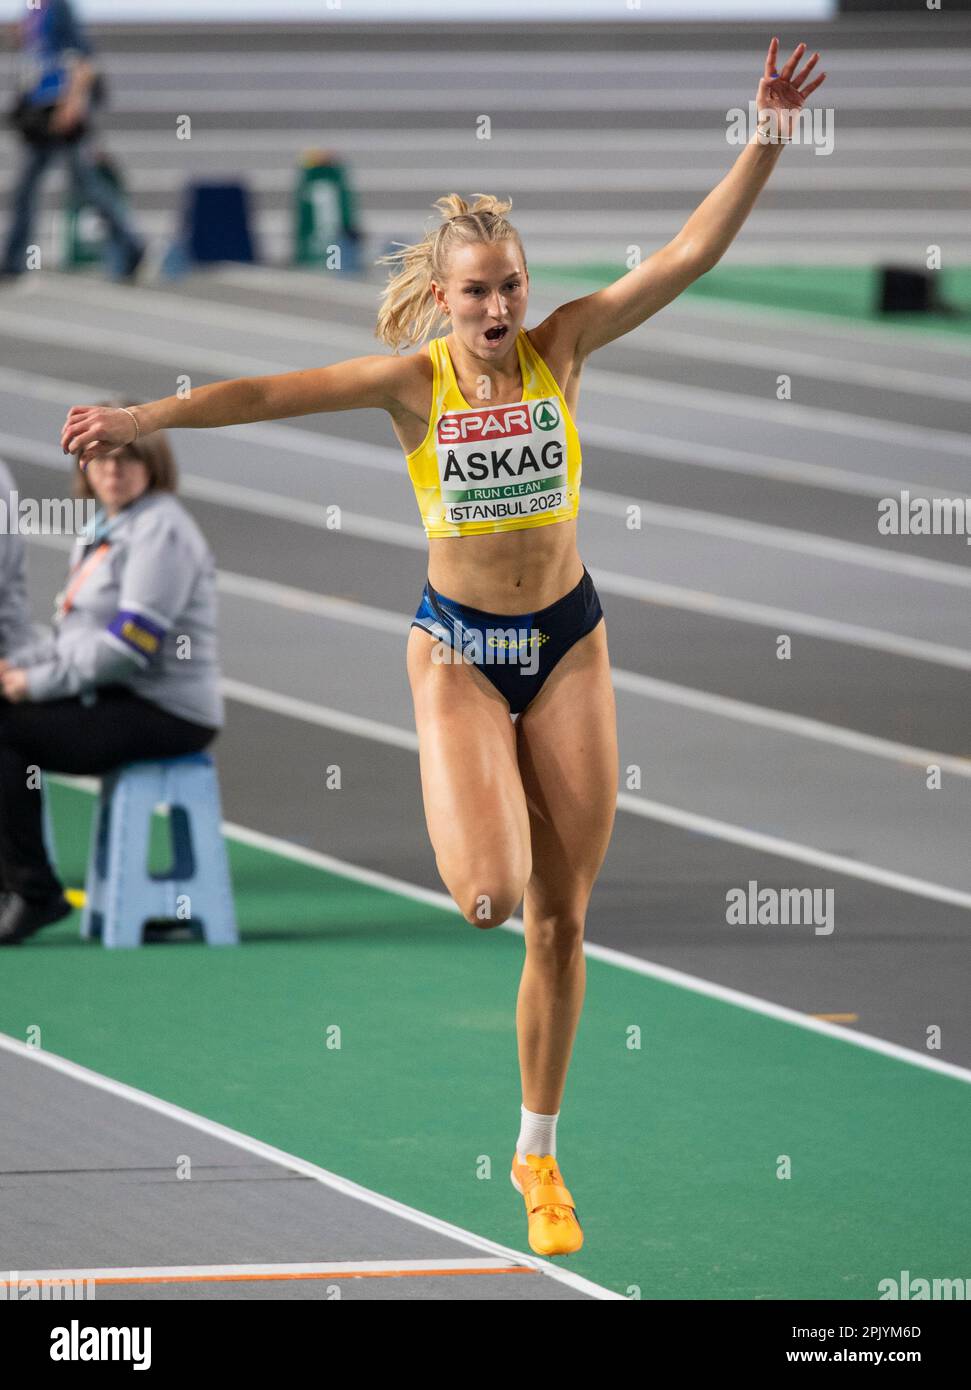 Tuğba Danismaz of Turkey competing in the women's triple jump final at the  European Indoor Athletics Championships at Ataköy Athletics Arena in Istanb  Stock Photo - Alamy